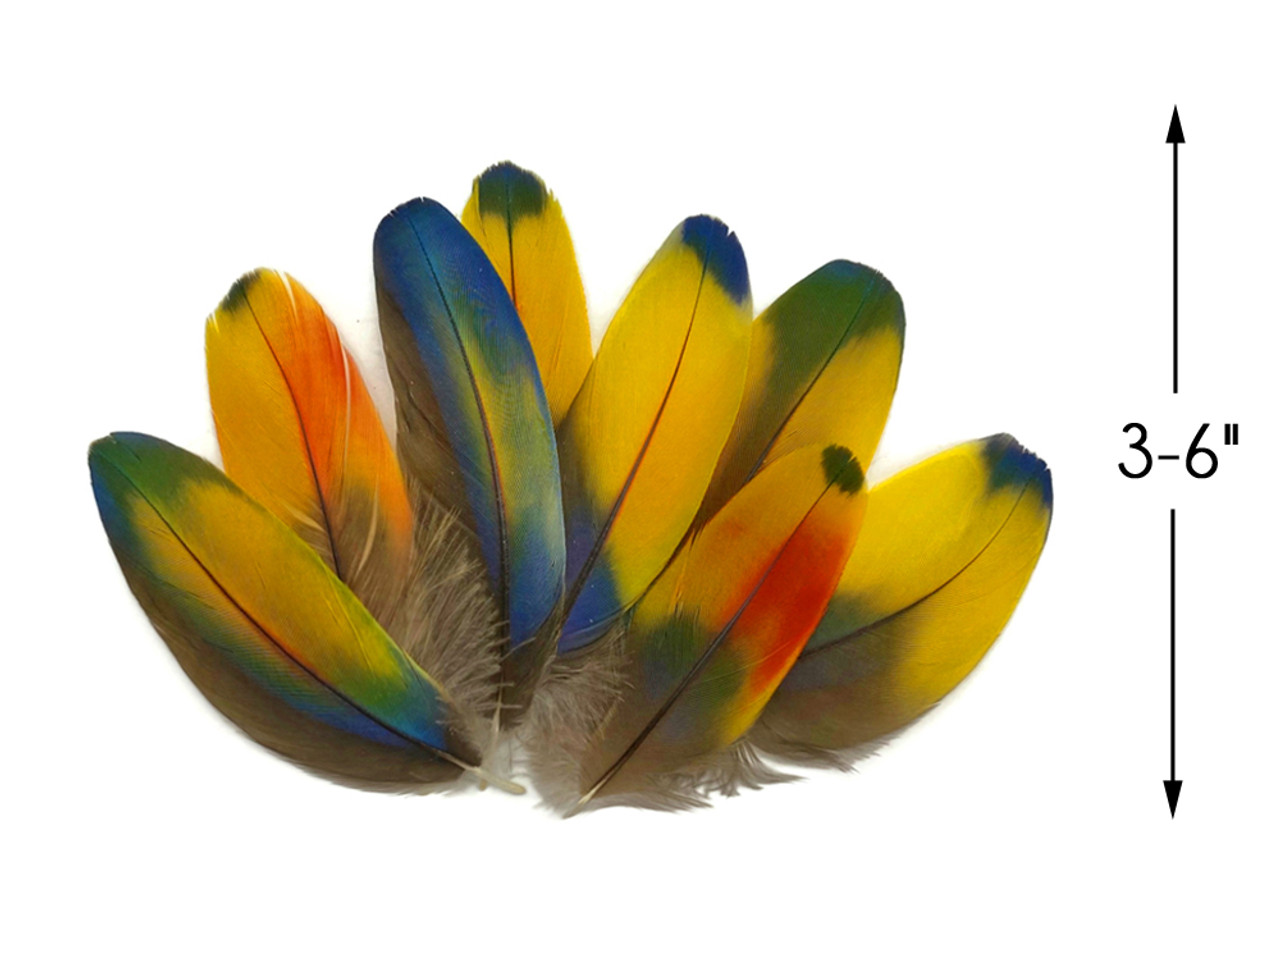 4 Pieces - Jewel Multicolor Iridescent Scarlet Macaw Large Body Plumage  Feathers Ethically Sourced Cruelty Free Craft Supply